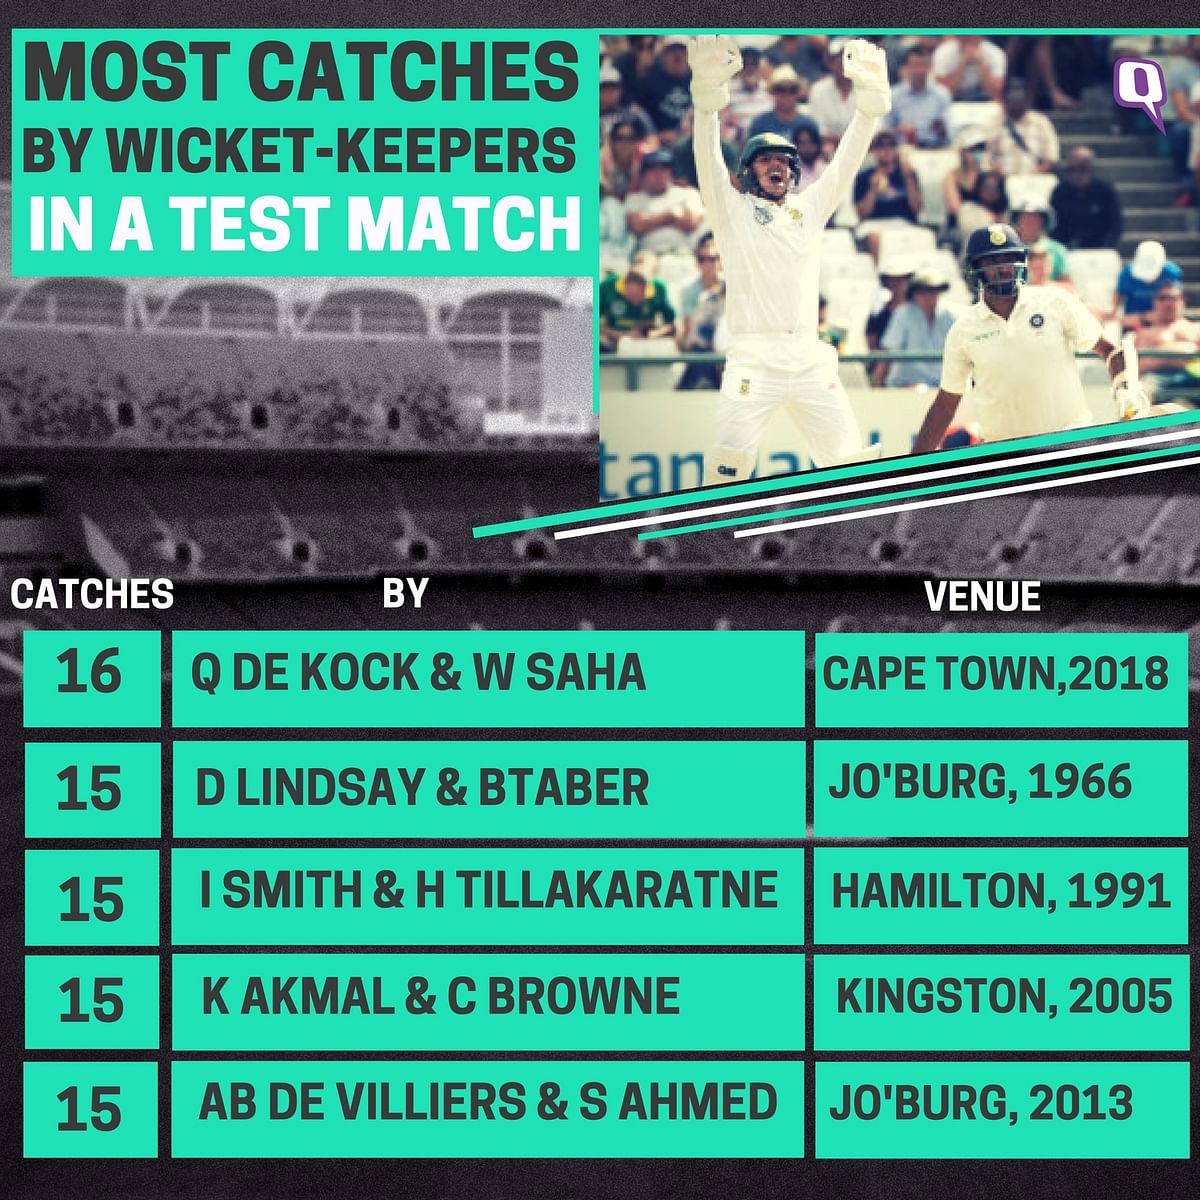 Wriddhiman Saha and Quinton de Kock together took 16 catches in the match.